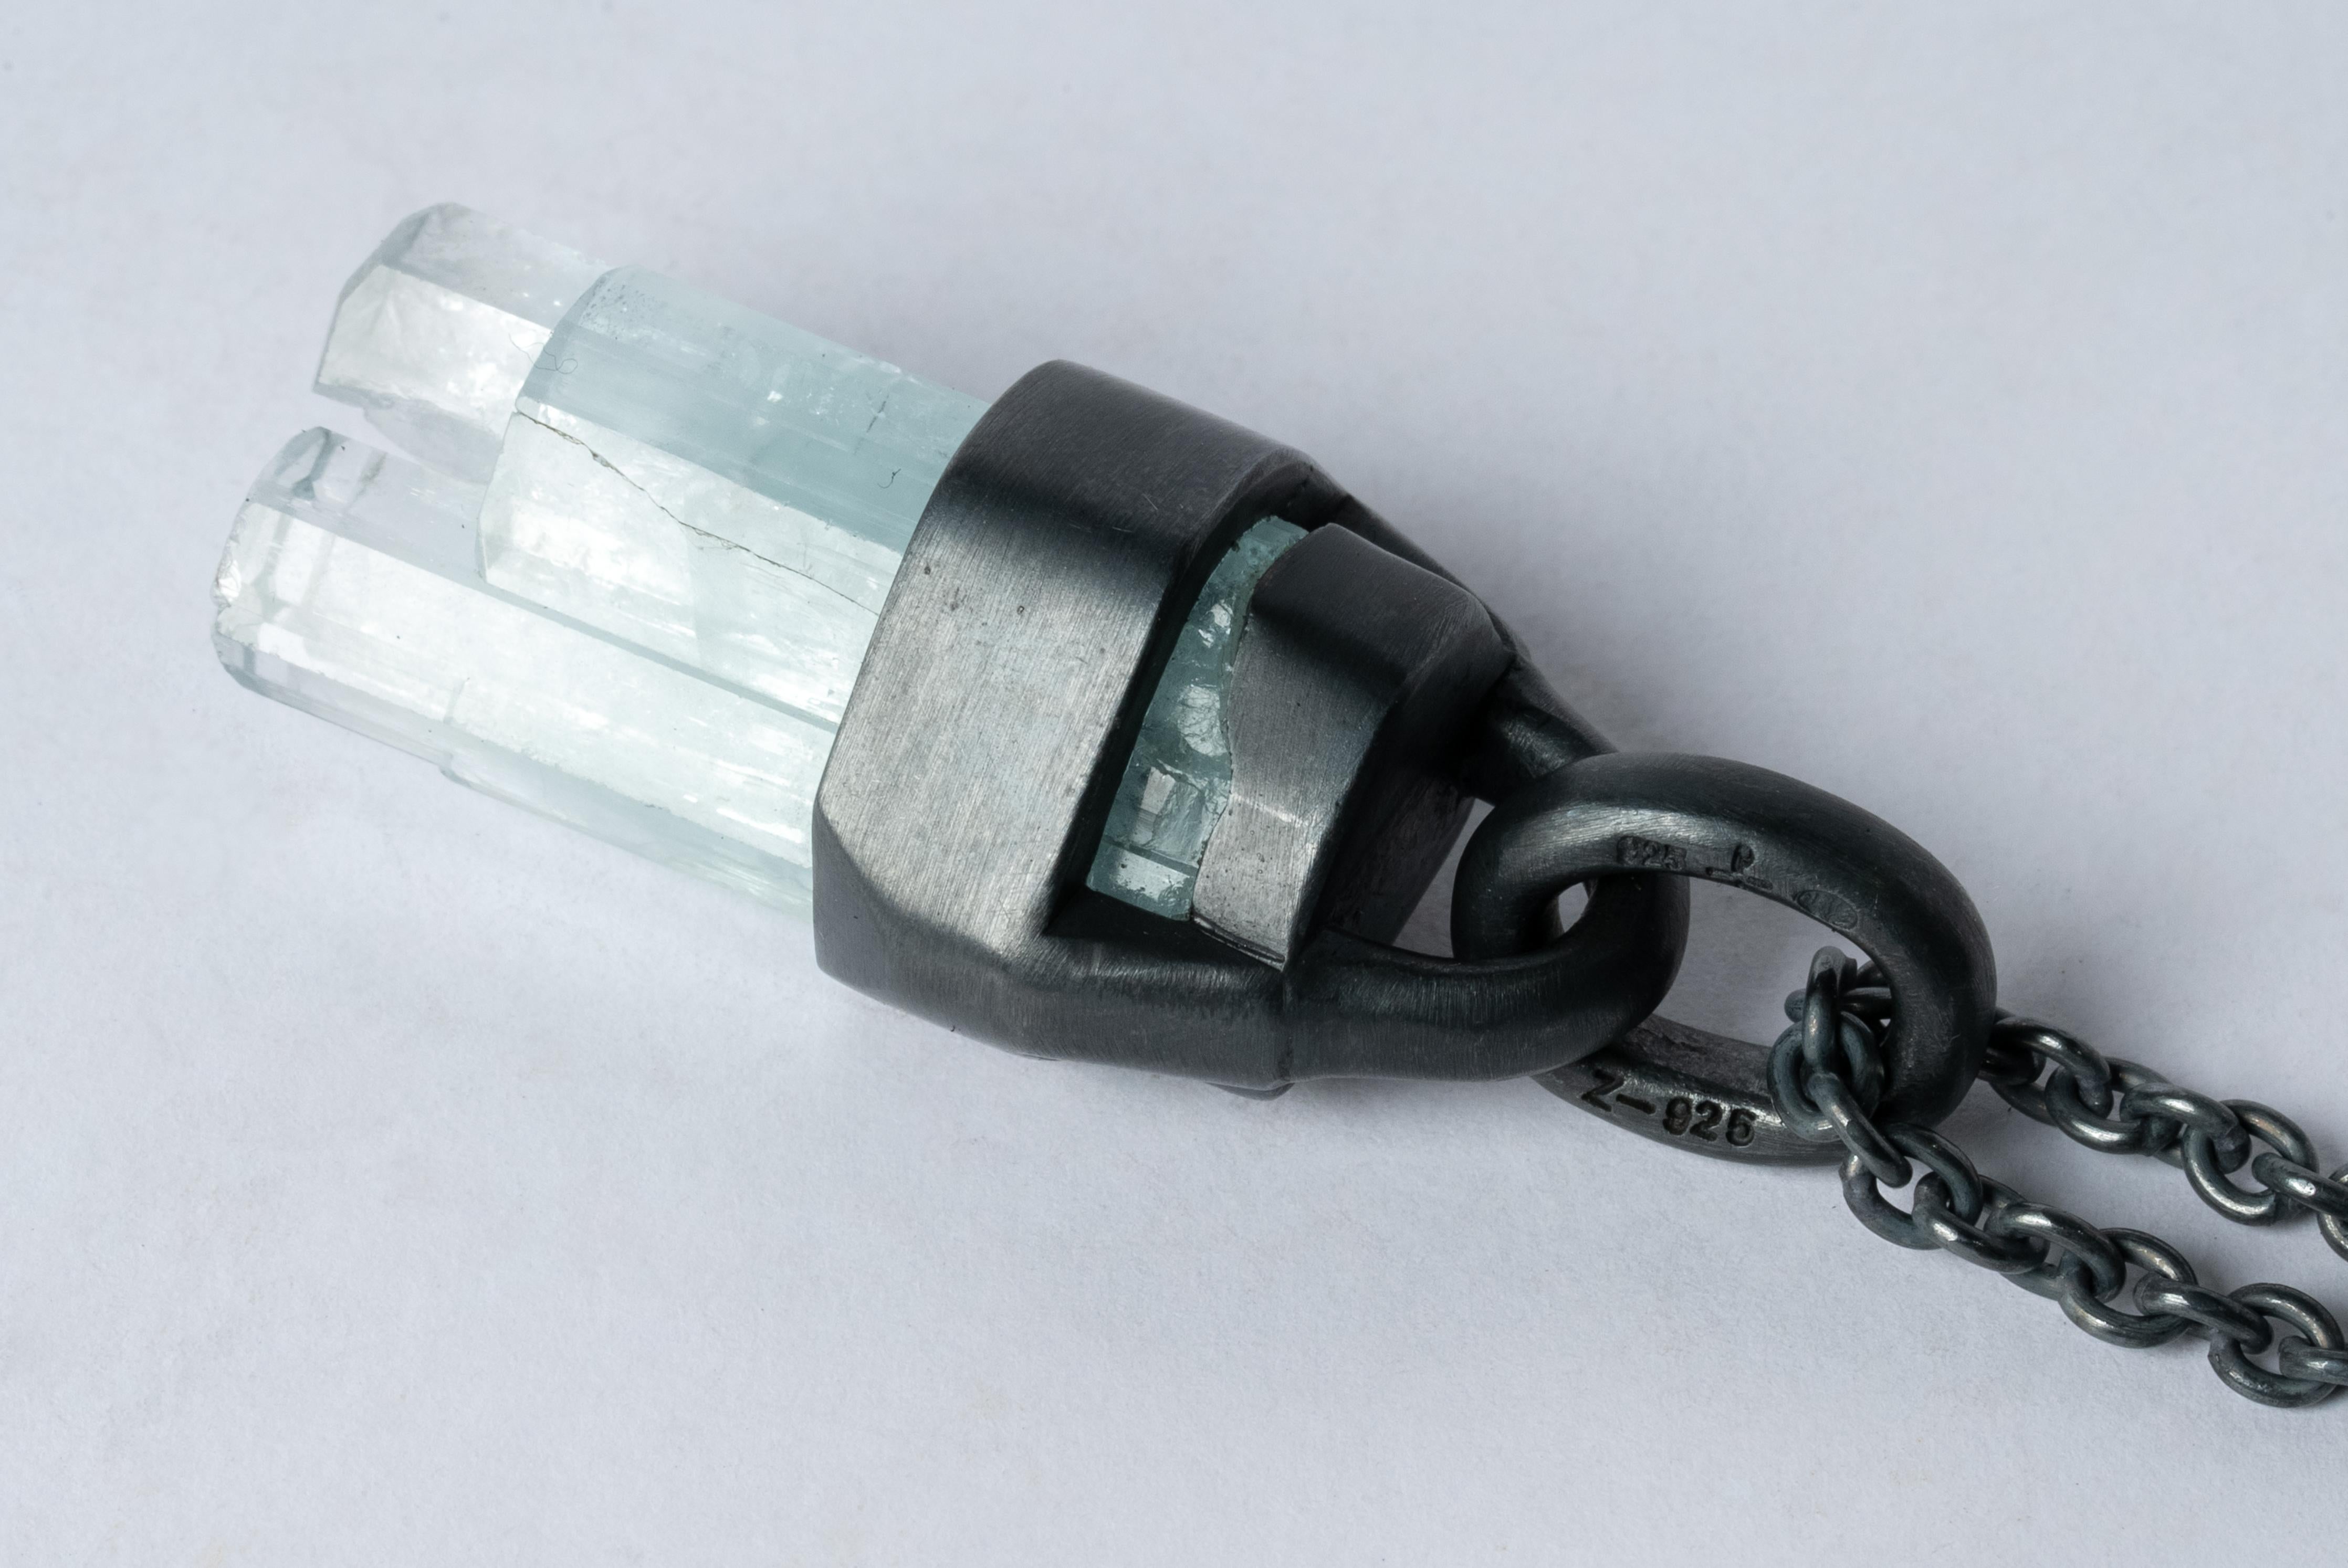 Talisman necklace in black sterling and a rough aquamarine. Black Sterling is a surface oxidation of sterling silver. This finish may fade over time, which can be considered an enhancement. The Talisman series is an exploration into the power of